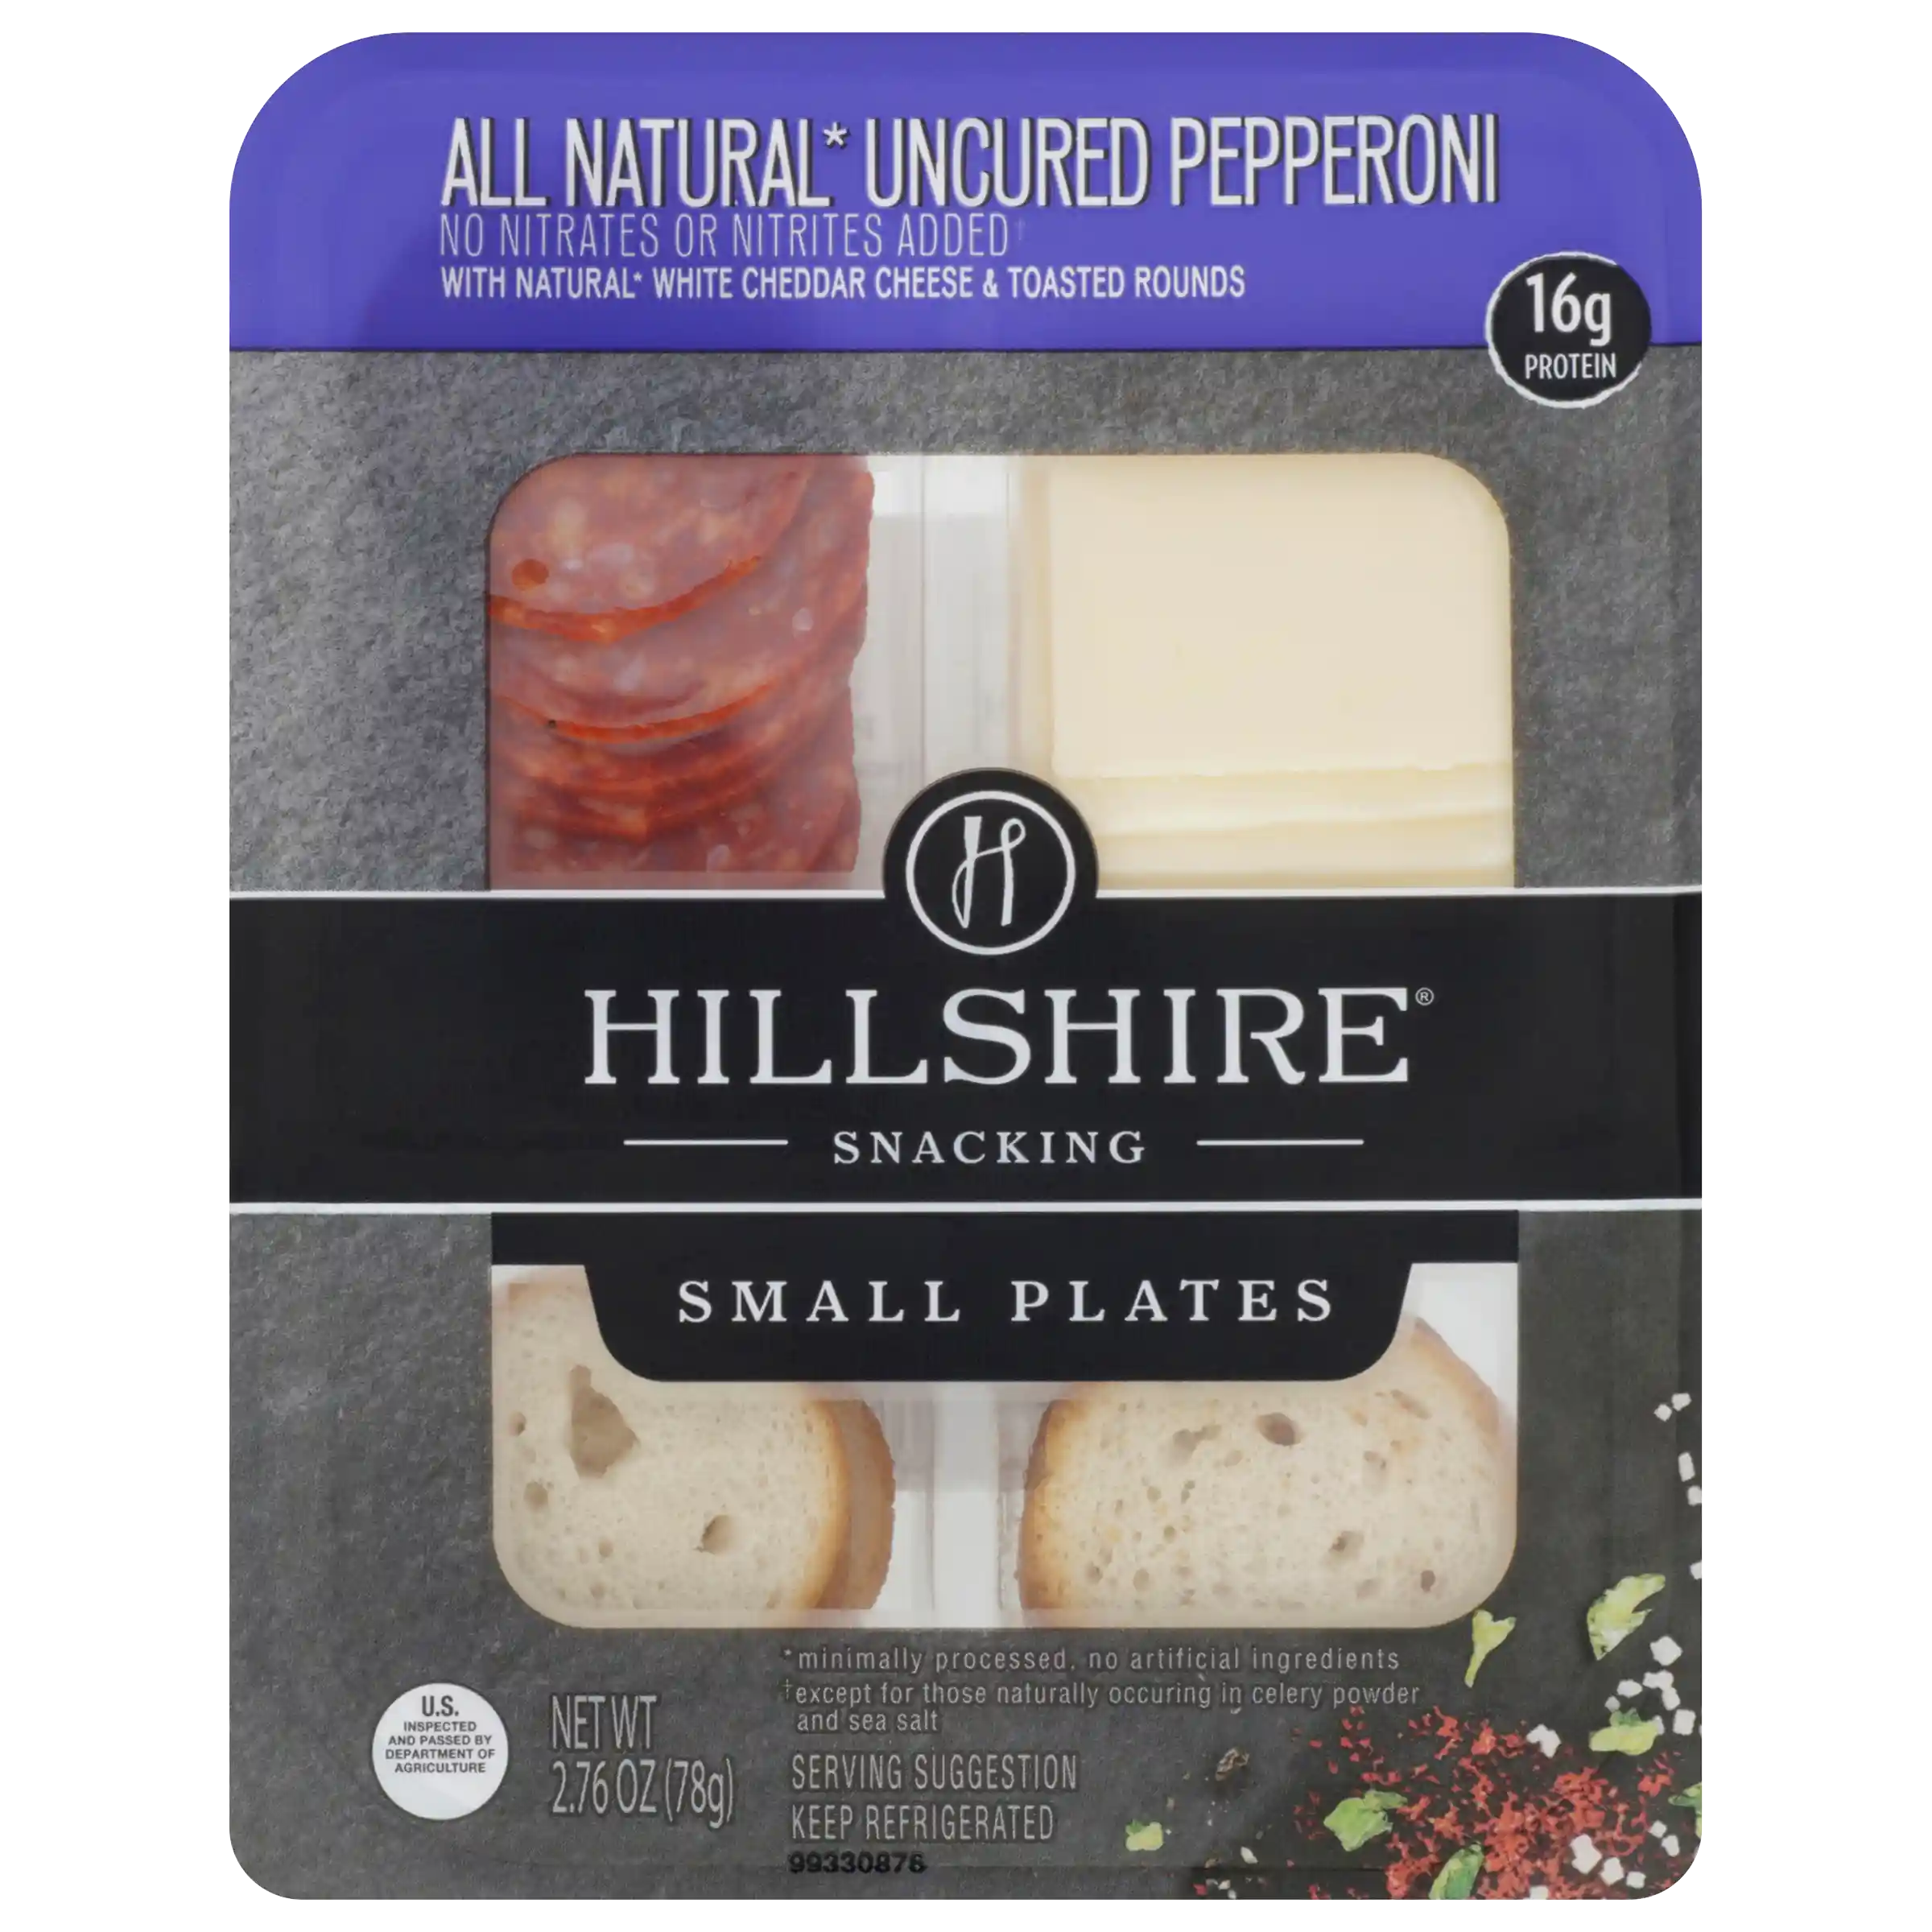 Hillshire® Snacking Small Plates, All Natural* Uncured Pepperoni Deli Lunch Meat with Natural* White Cheddar Cheese, 2.76 oz  _image_11